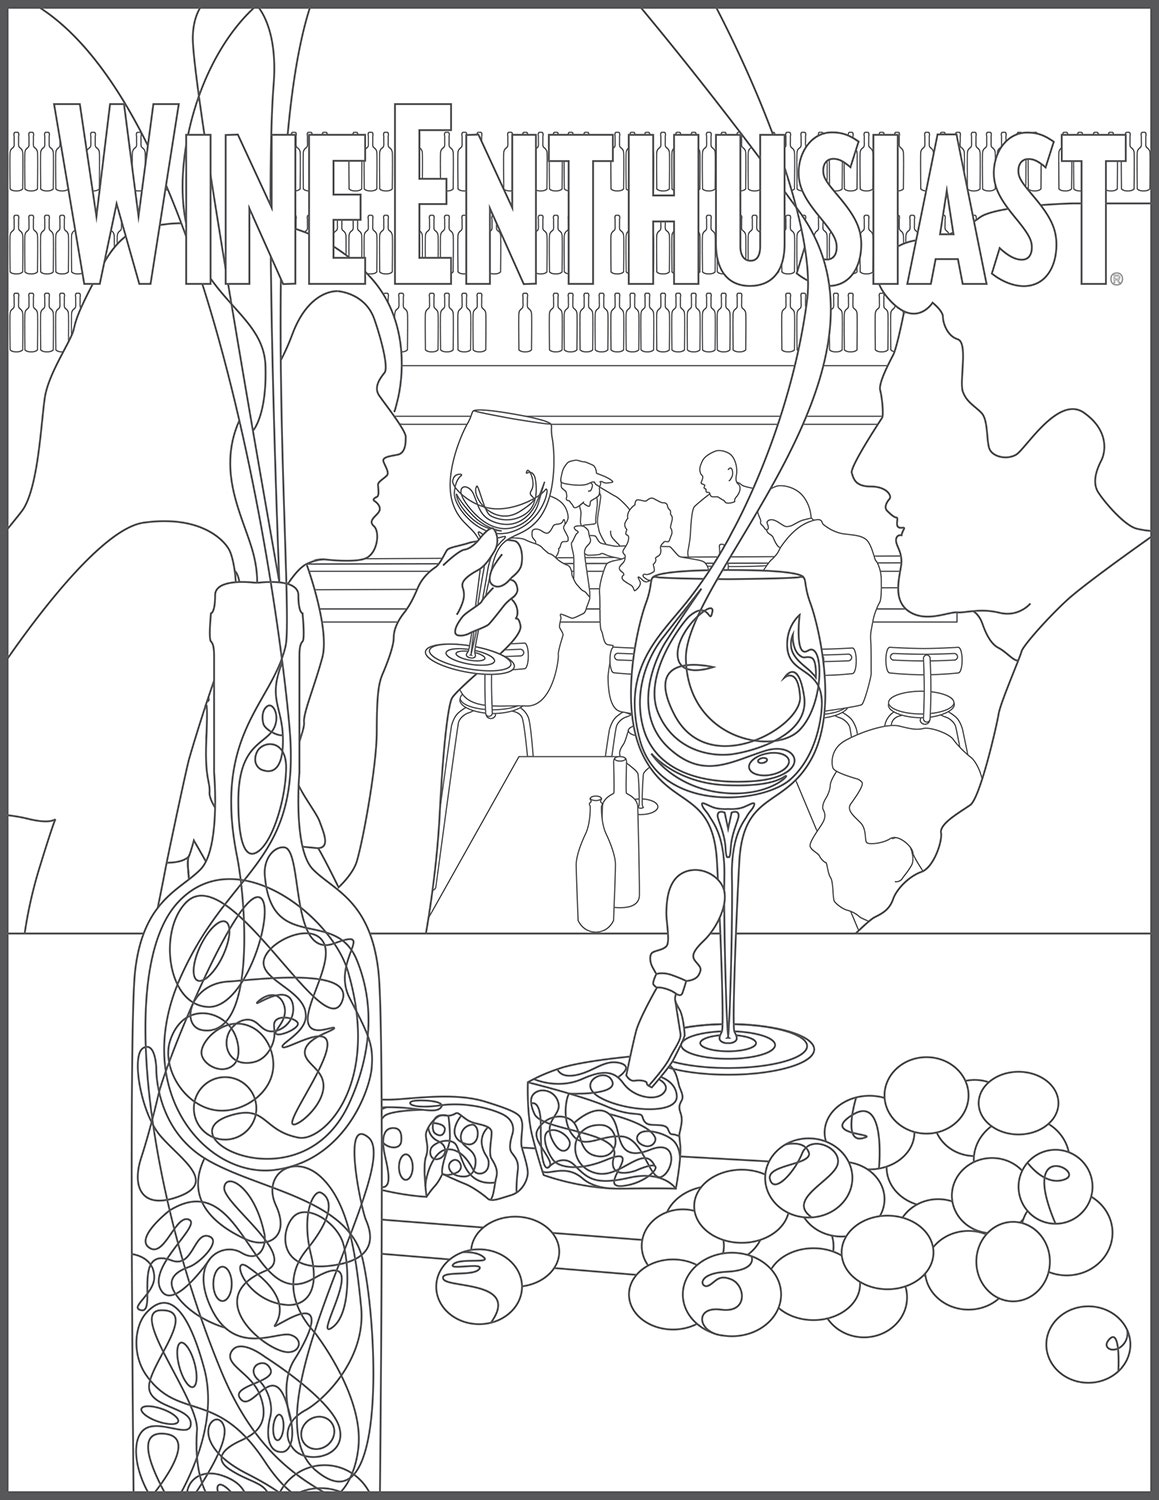 Adult coloring book color inside the wines wine enthusiast magazine